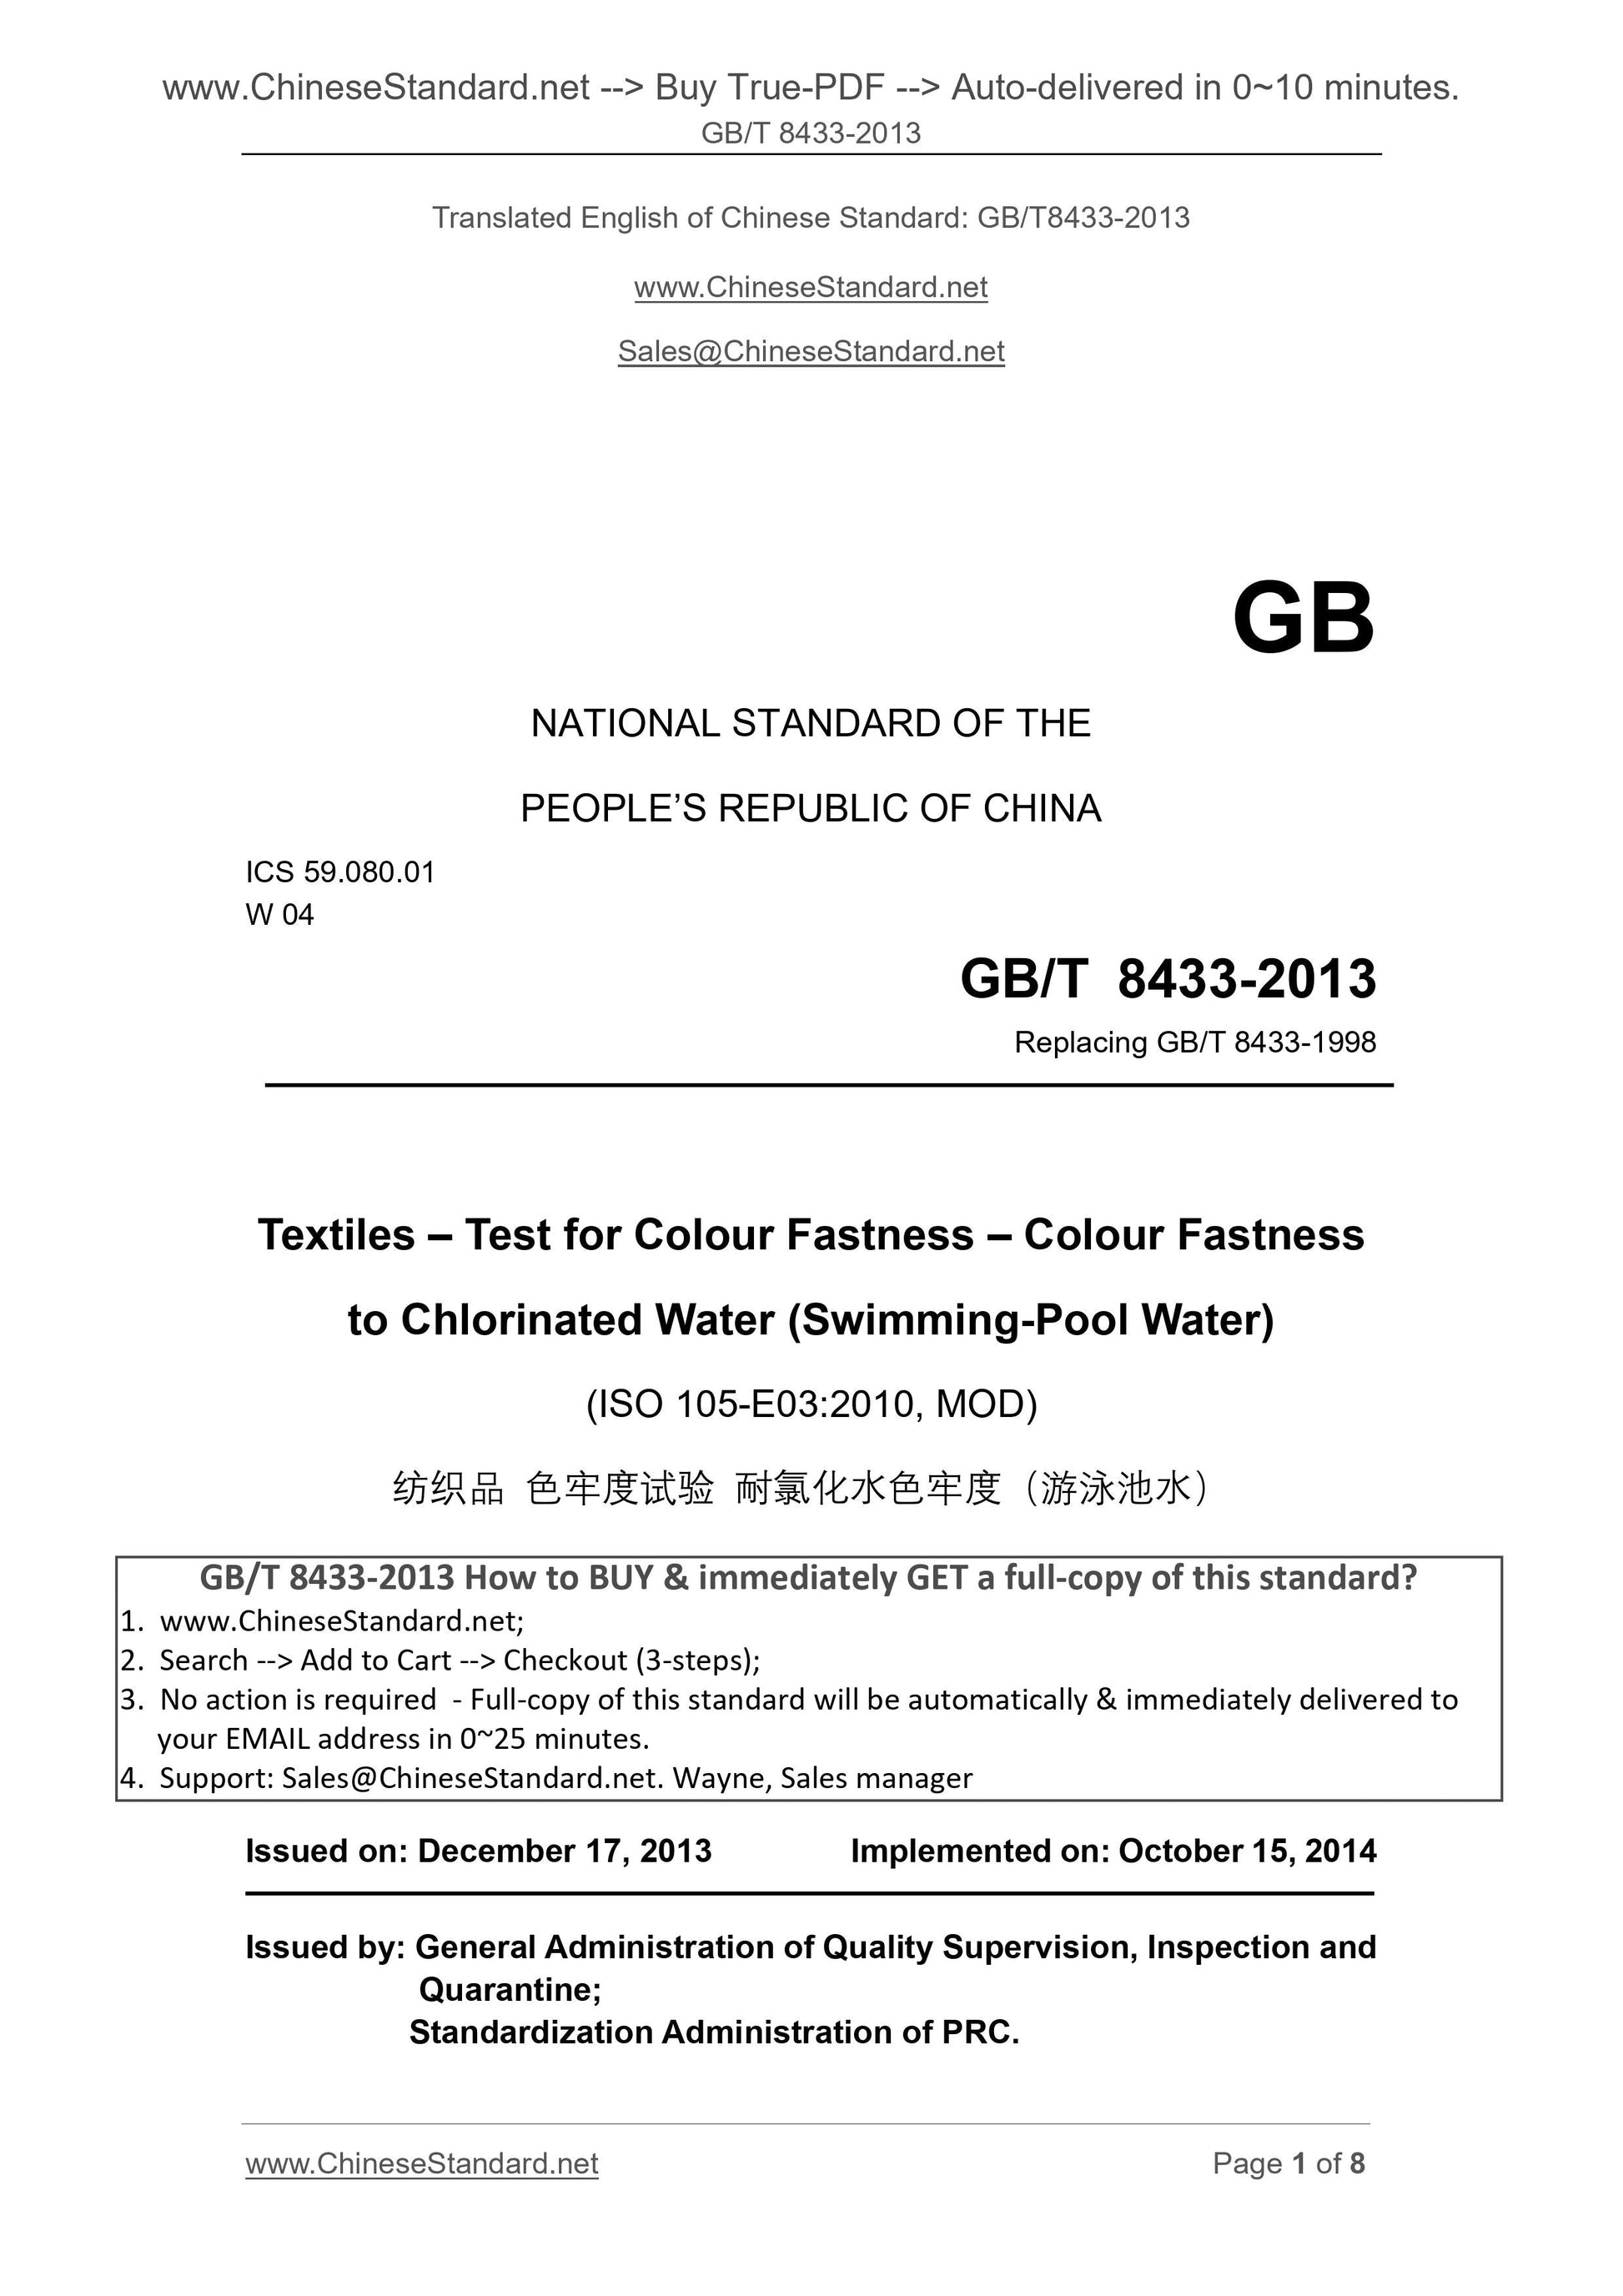 GB/T 8433-2013 Page 1